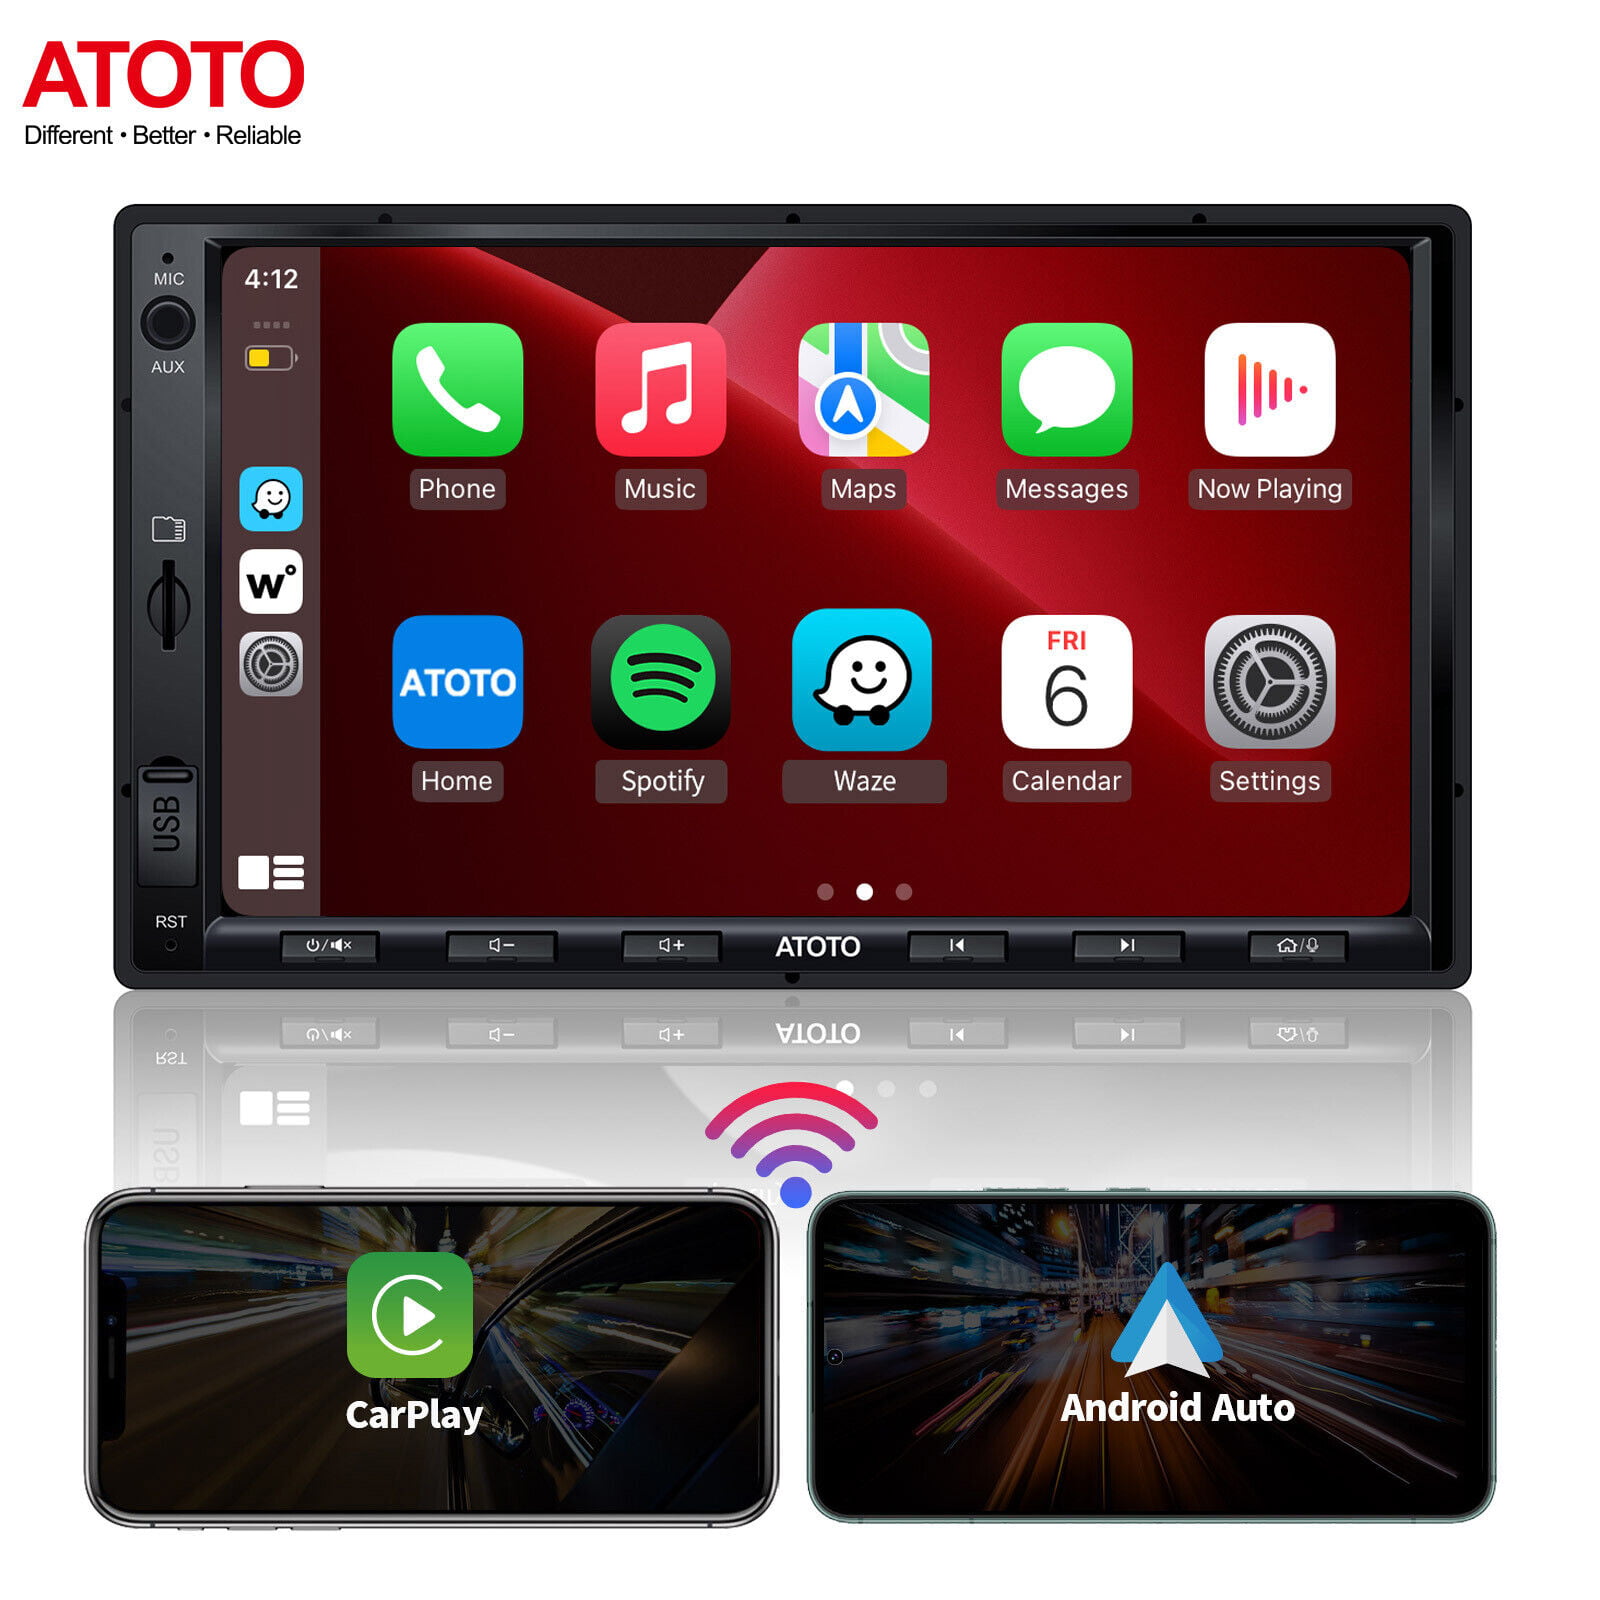 ATOTO F7 WE Wireless CarPlay & Wireless Android Auto Car Stereo Radio - 7  inch Double Din, Touchscreen Car Radio with Bluetooth, Mirror Link, HD LRV,  Quick Charge, FM/AM, GPS Navi, Voice